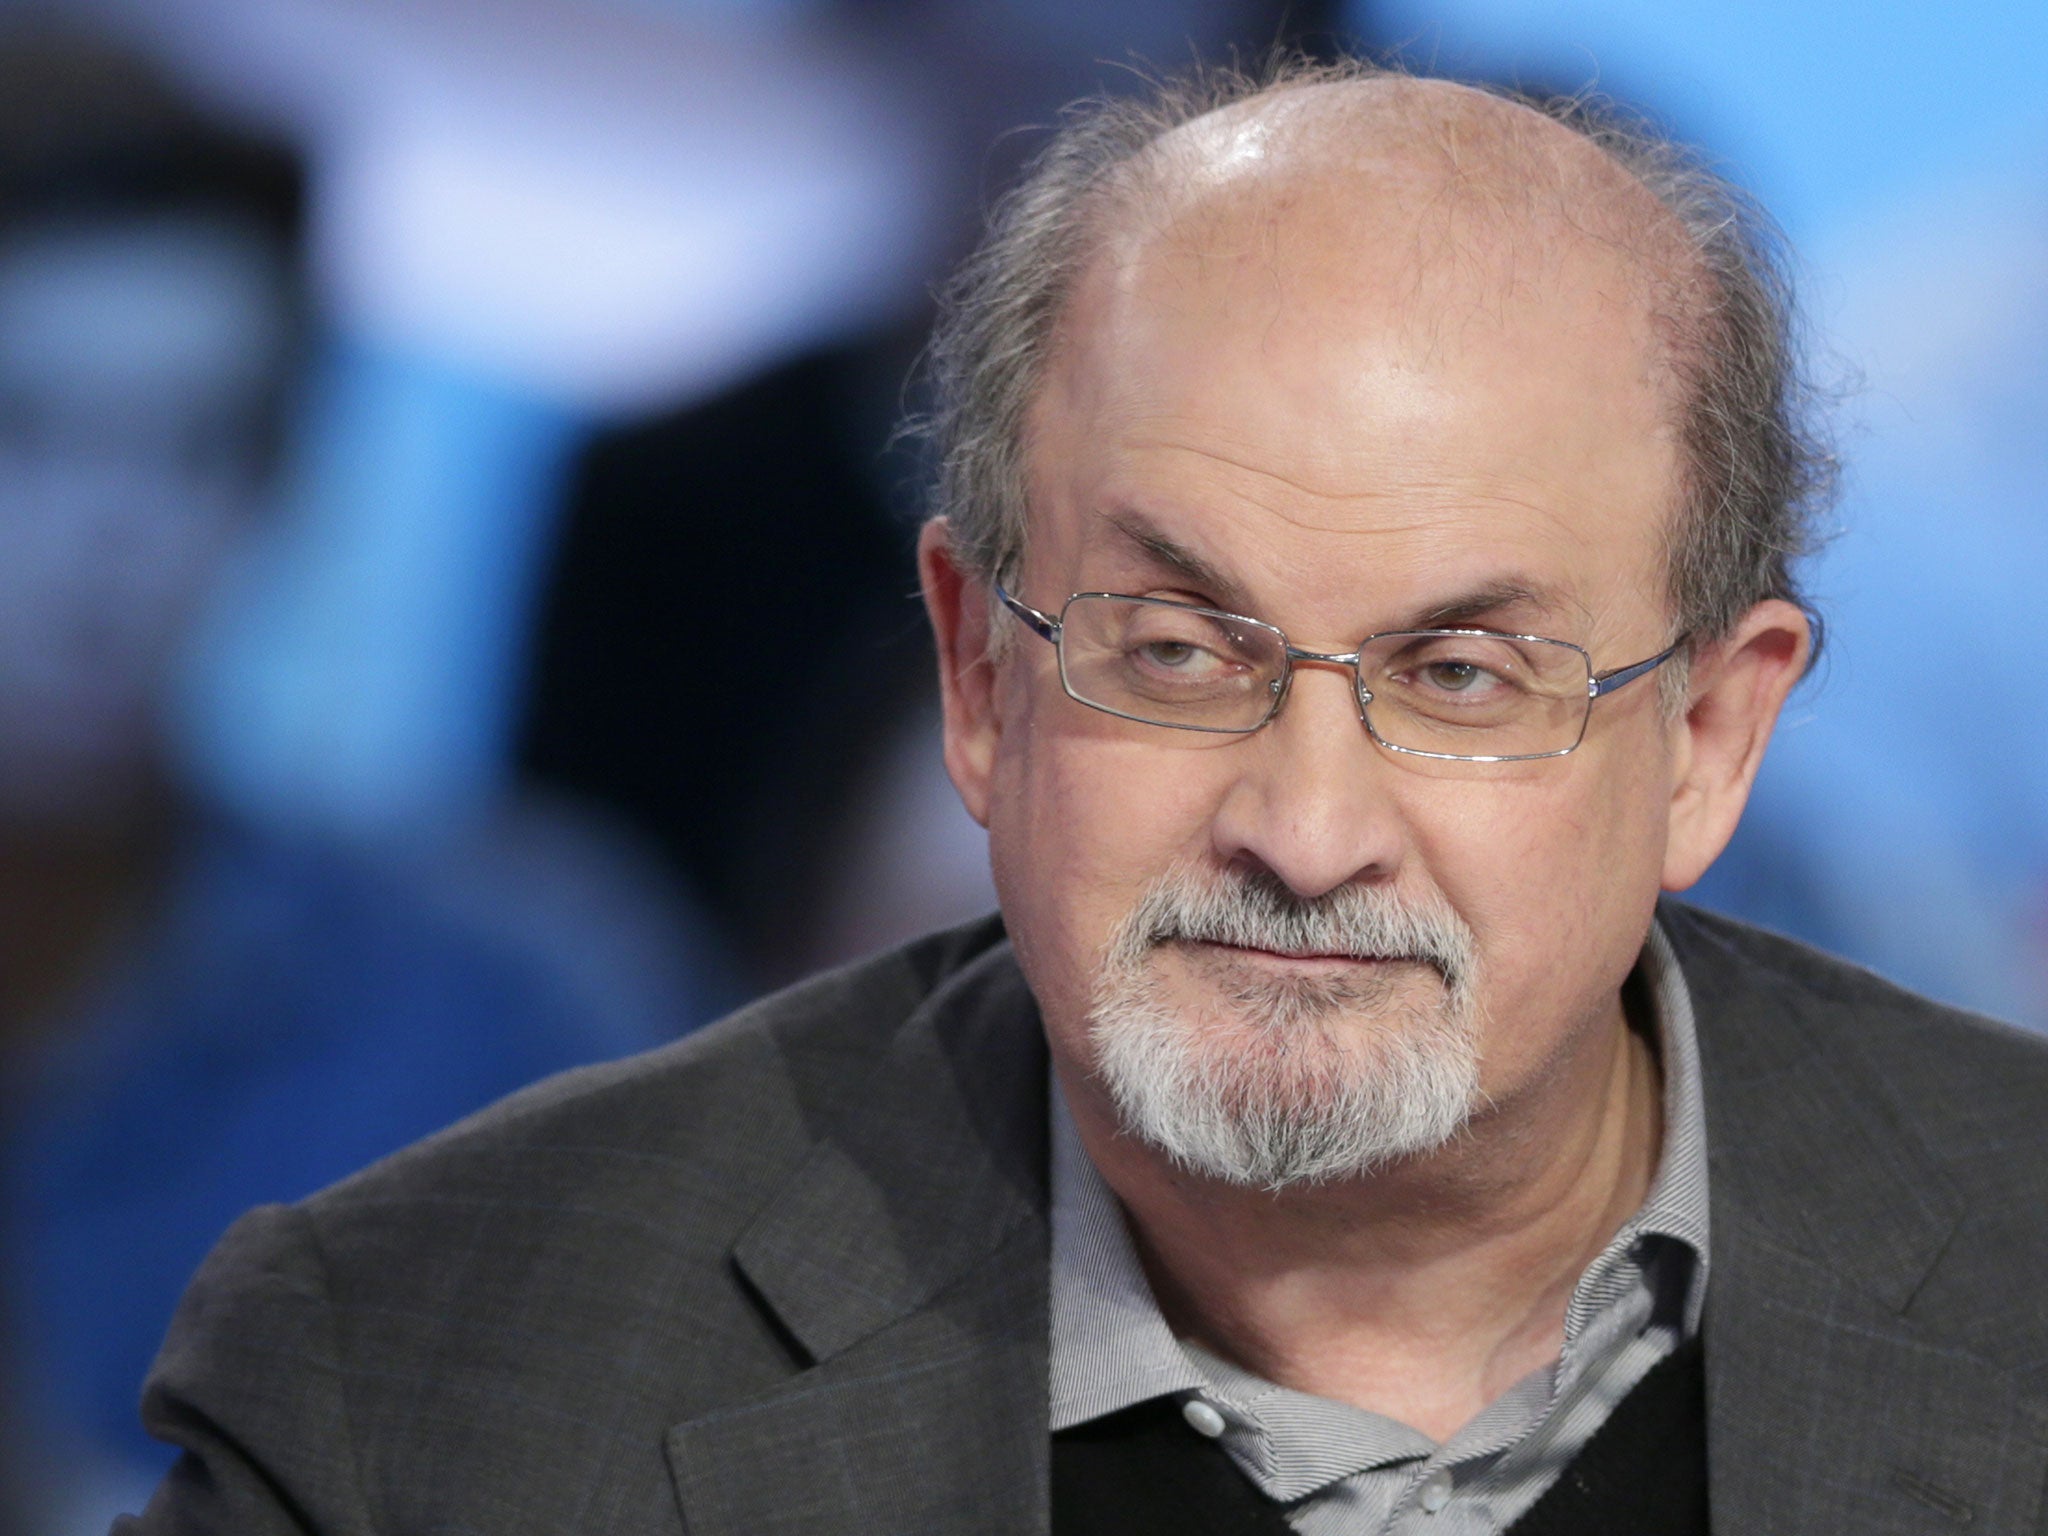 Salman Rushdie was the 2014 recipient of the PEN/Pinter Prize for outstanding literary achievement